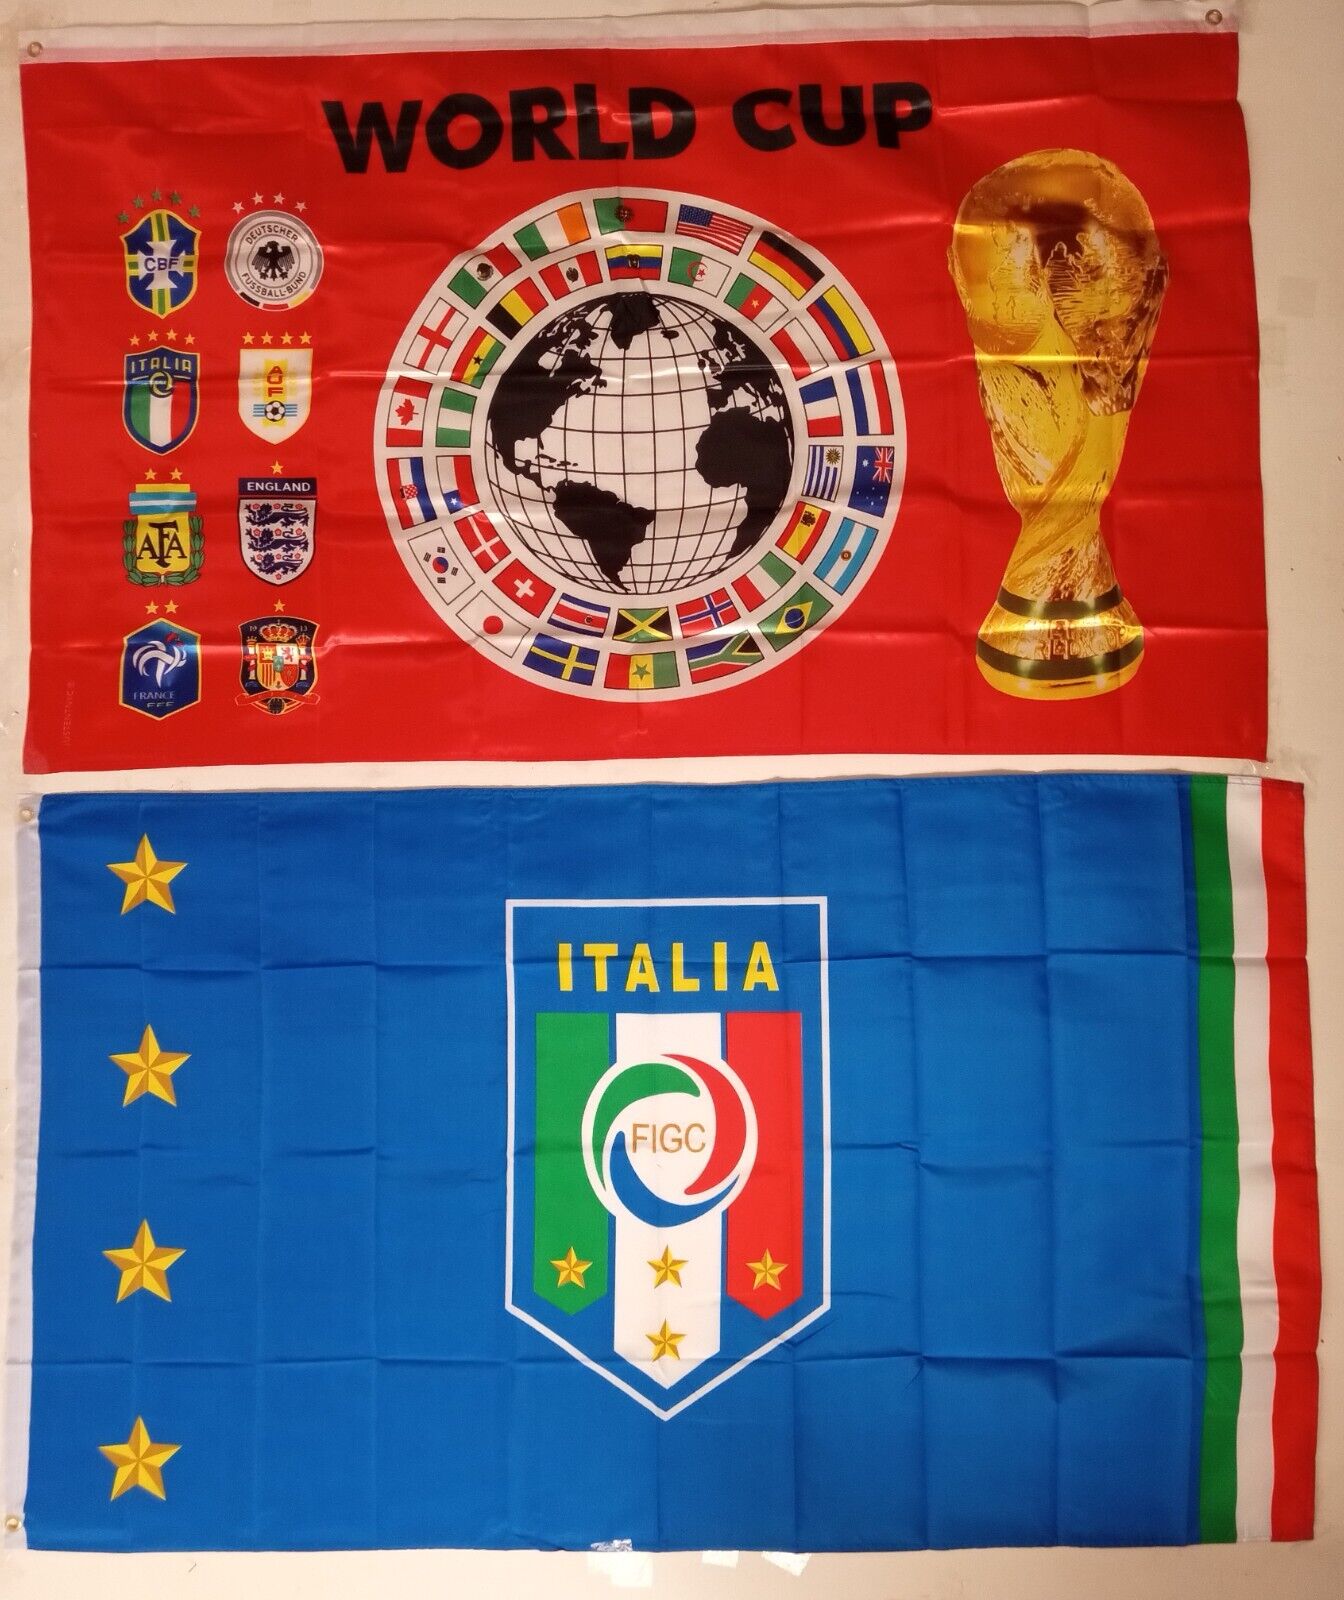 1 ITALY FEDERATION FLAG + 1 GENERIC WORLD CUP FLAG (3X5 FT) $35